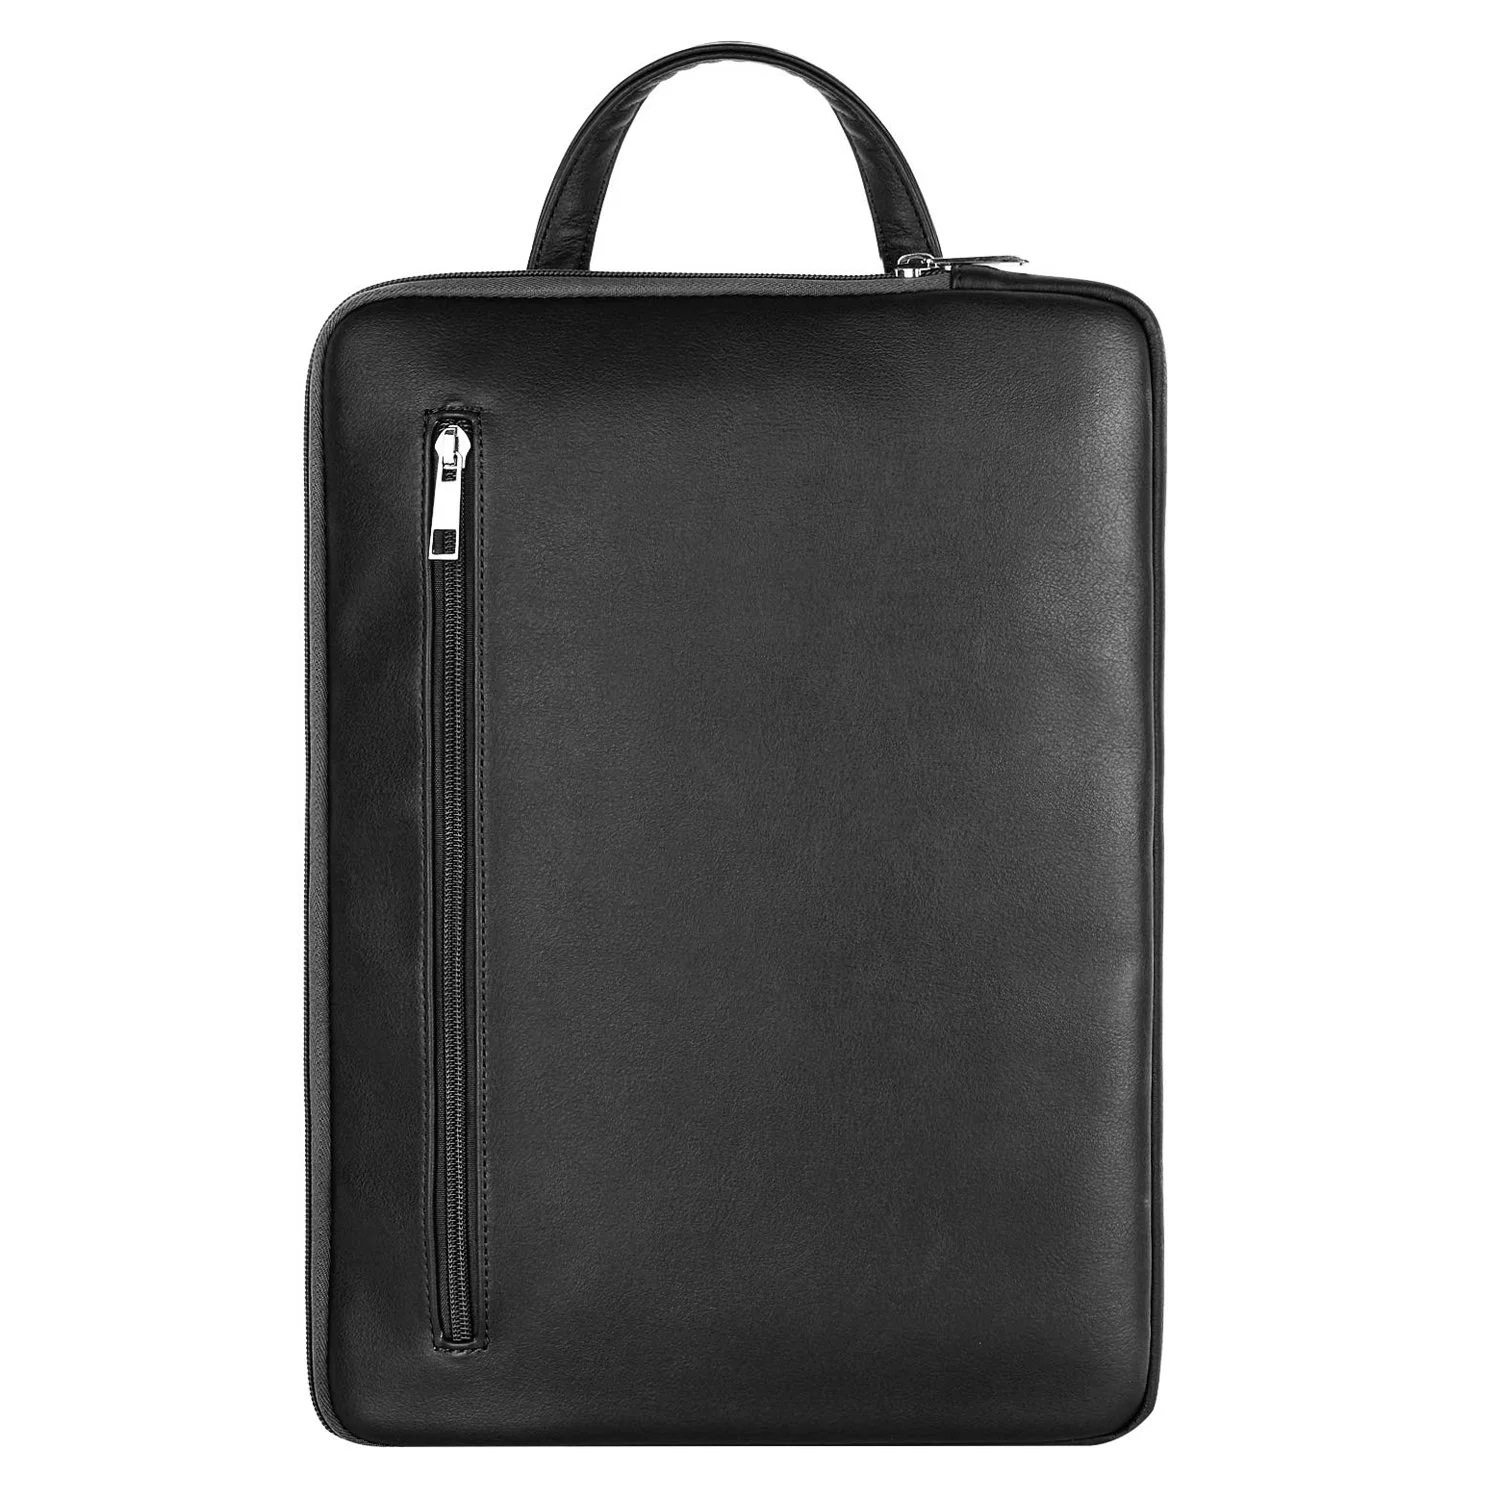 Wholesale 2021 New Design Laptop Sleeve Bag with Handle PU Leather Carrying Case Bag for 13-13.5 Inch Briefcase Computer Sleeve